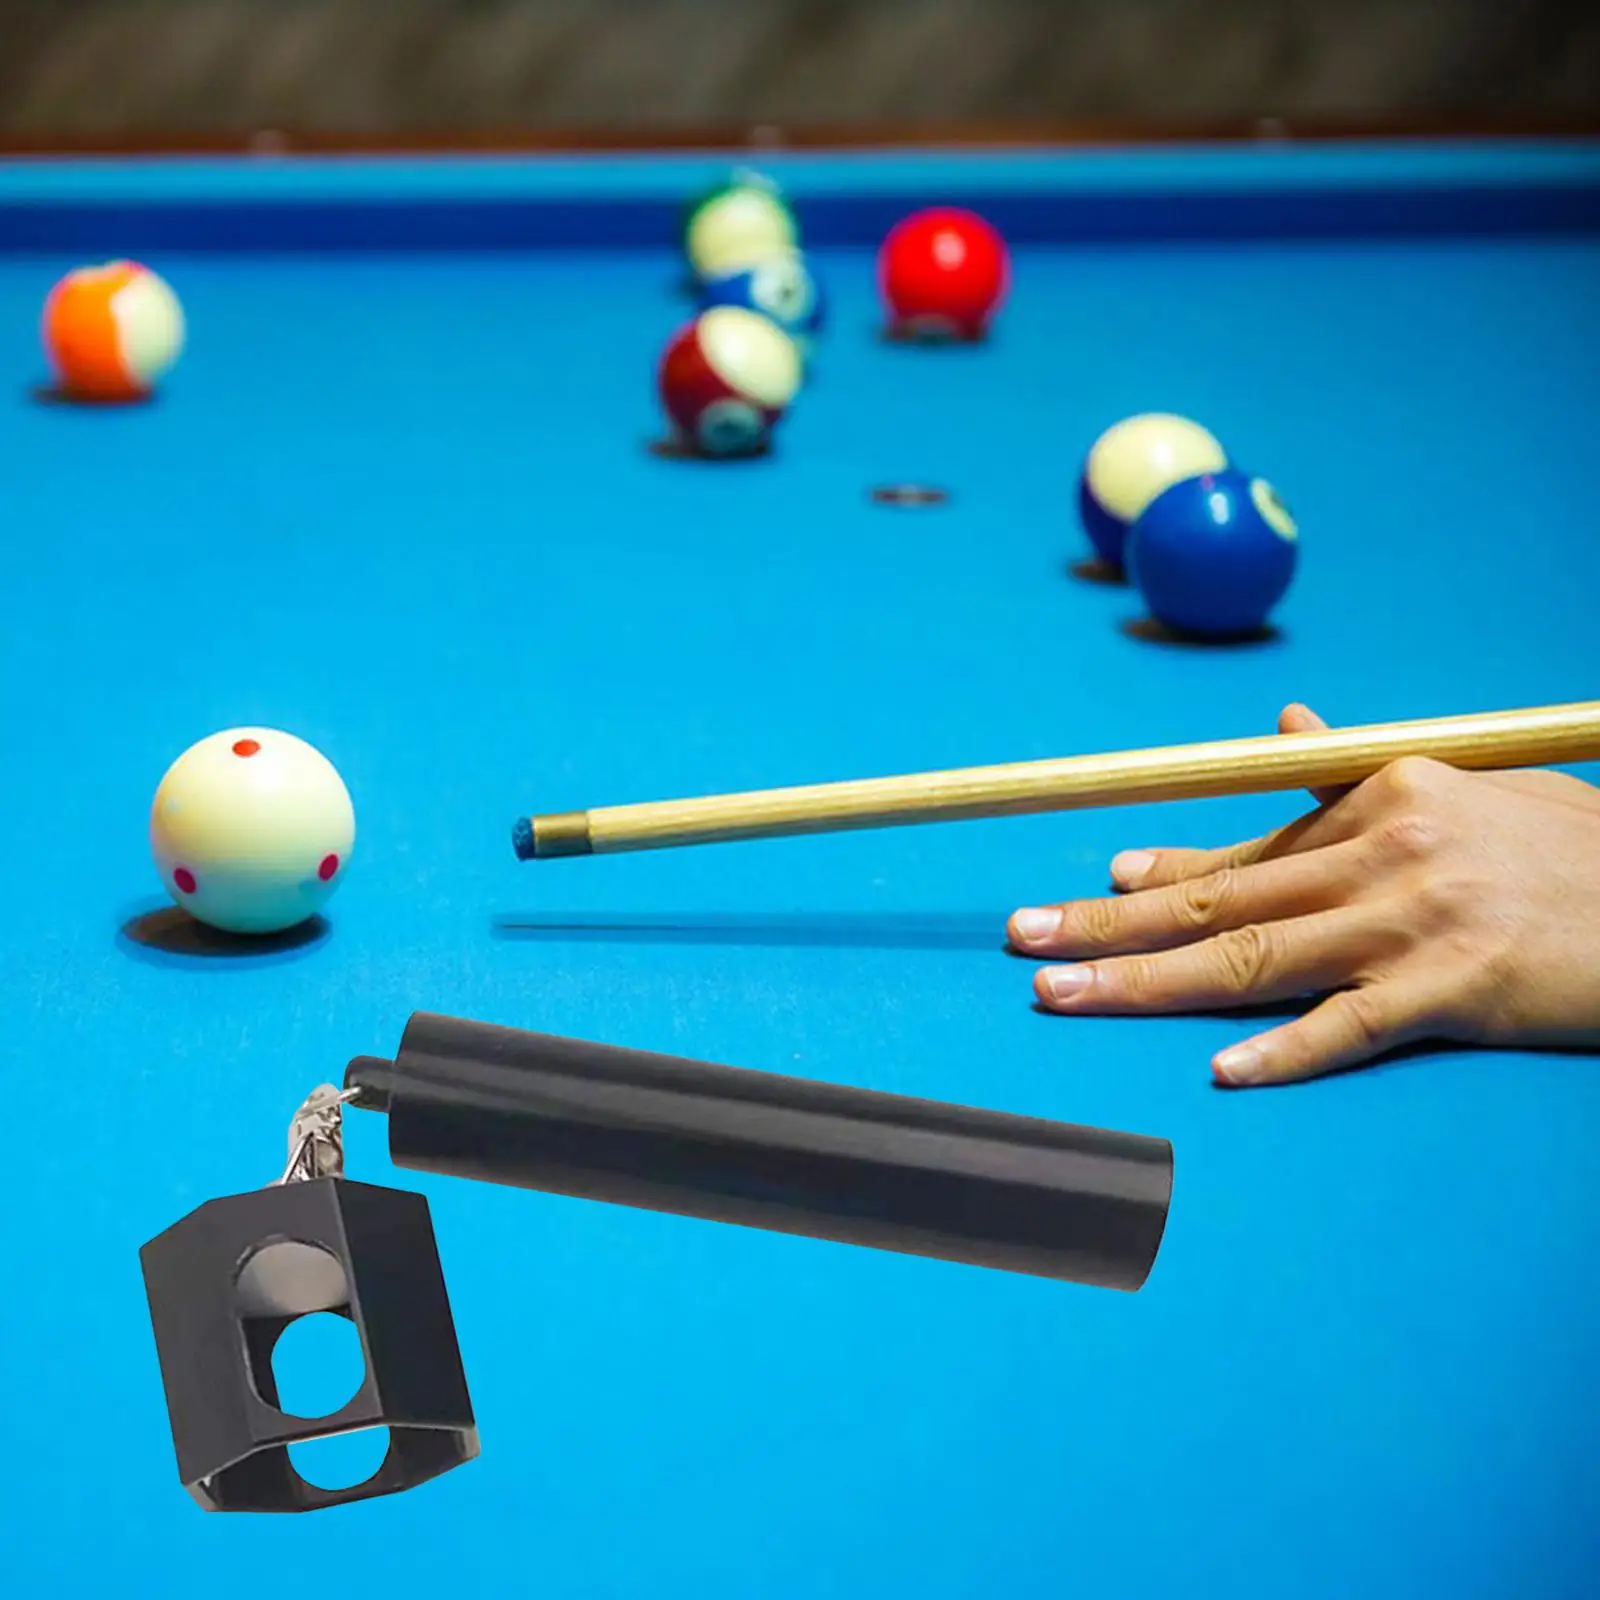 Billiard Pool Chalk Cup Holders Chalkers Billiard Chalk Case Billiards Snooker Pool Cue Chalk Holder for Billiards Players